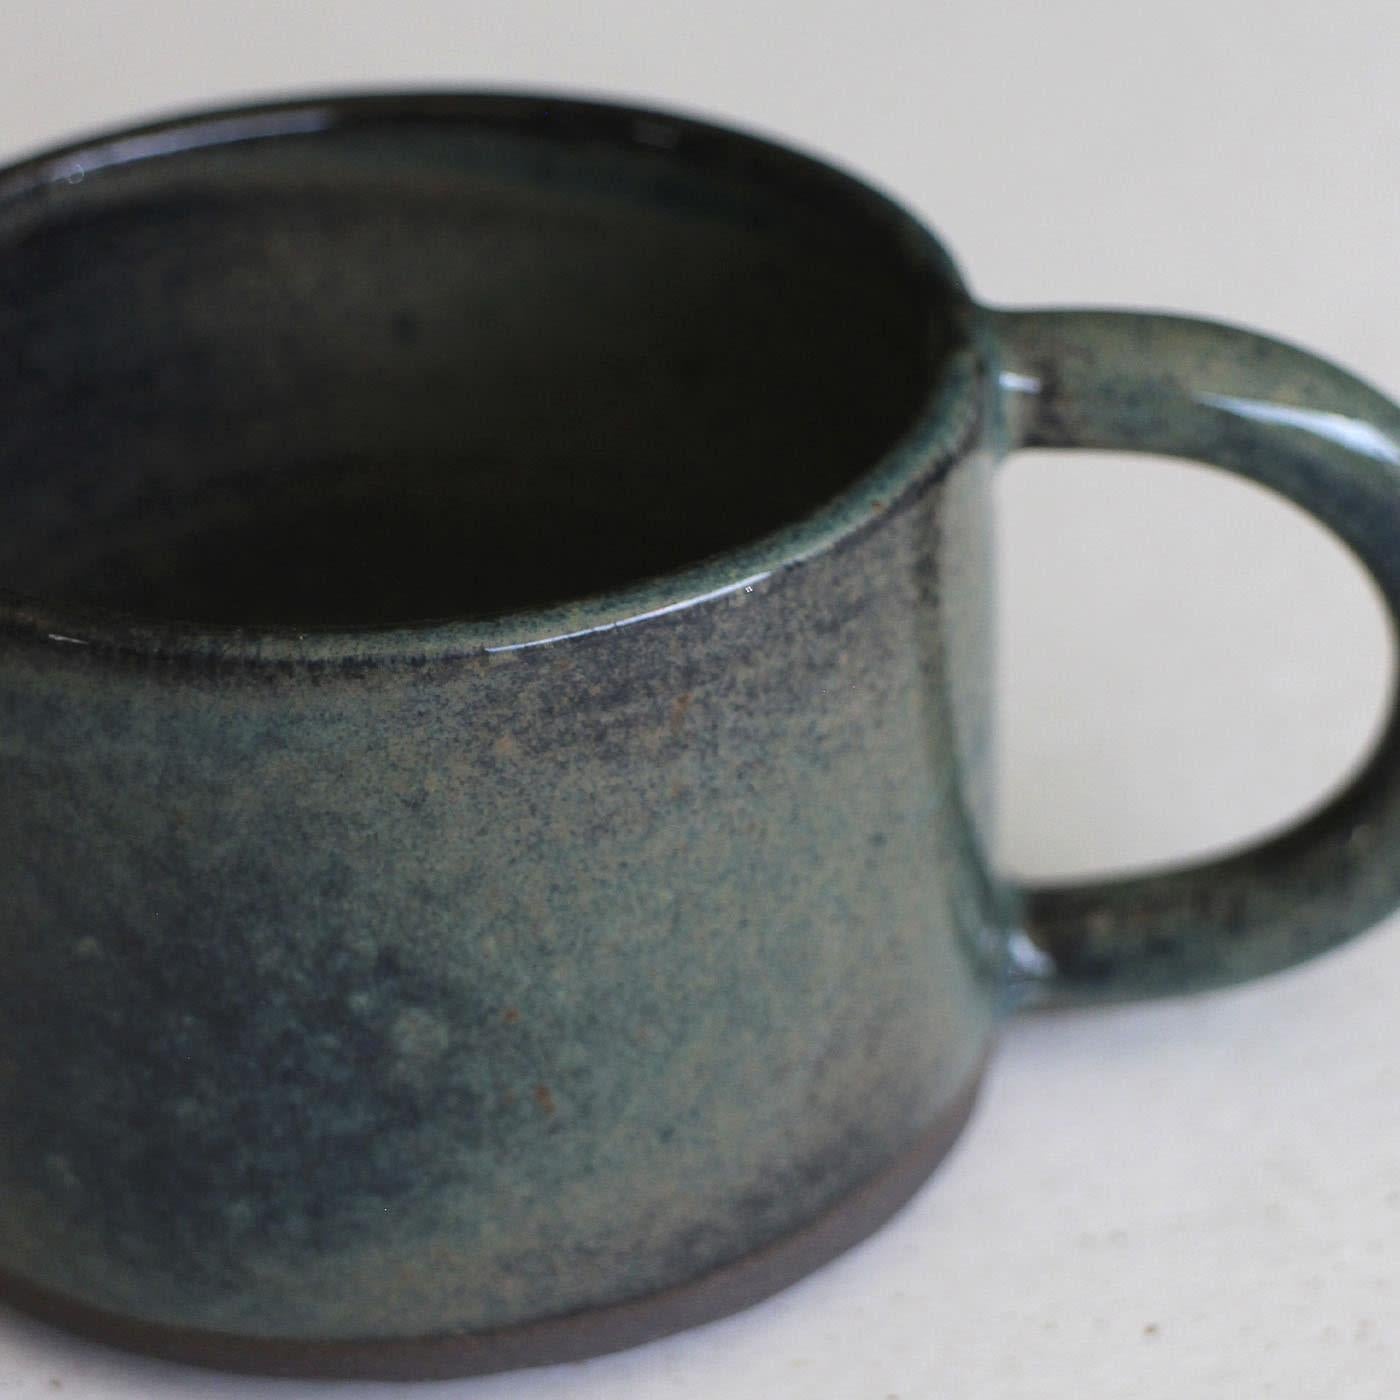 This one-of-a-kind stoneware set of 4 espresso cups with coordinated saucers celebrates the dreamy tones of blue, purple, and green ocean offers. Its evocative lead-free and non-toxic glaze flaunts a glossy finish that further emphasizes very unique